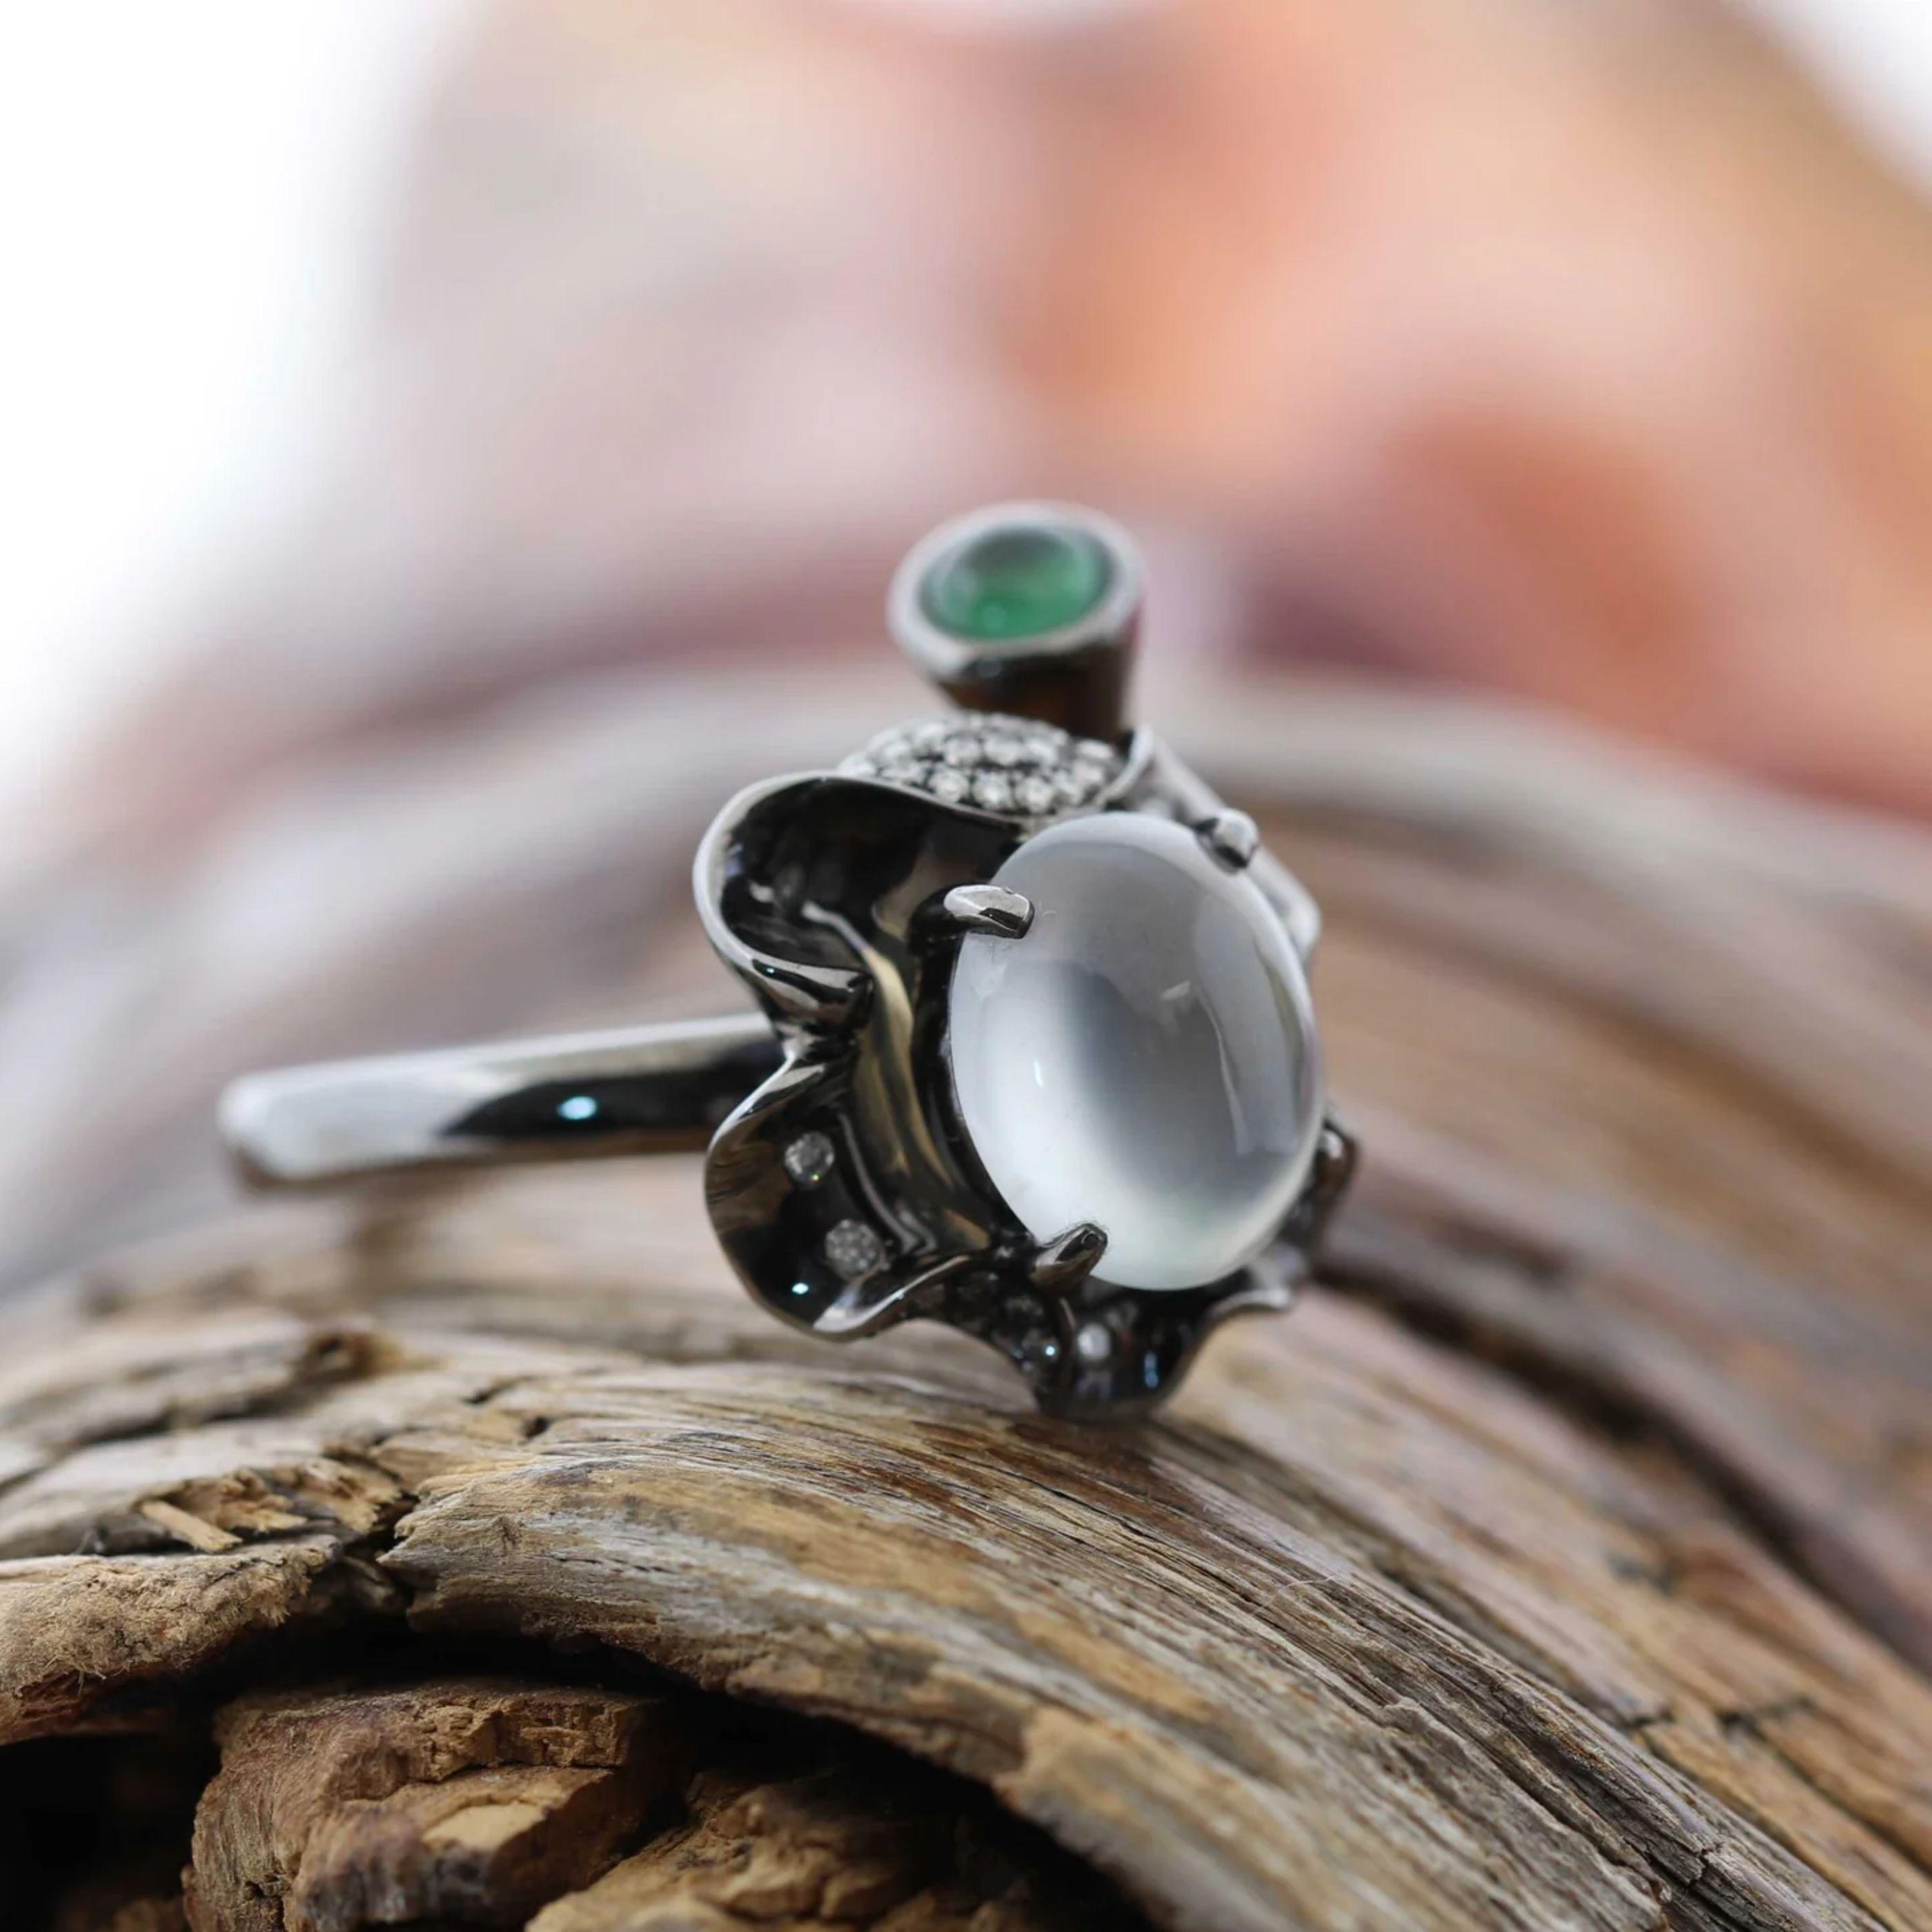 * UNIQUE DESIGN --- Inspired by the natural beauty of genuine Burmese Imperial Green Jadeite, the rich, beautiful apple green color is found on no other stone. This one of a kind engagement ring combines the natural beauty of the extremely rare gem